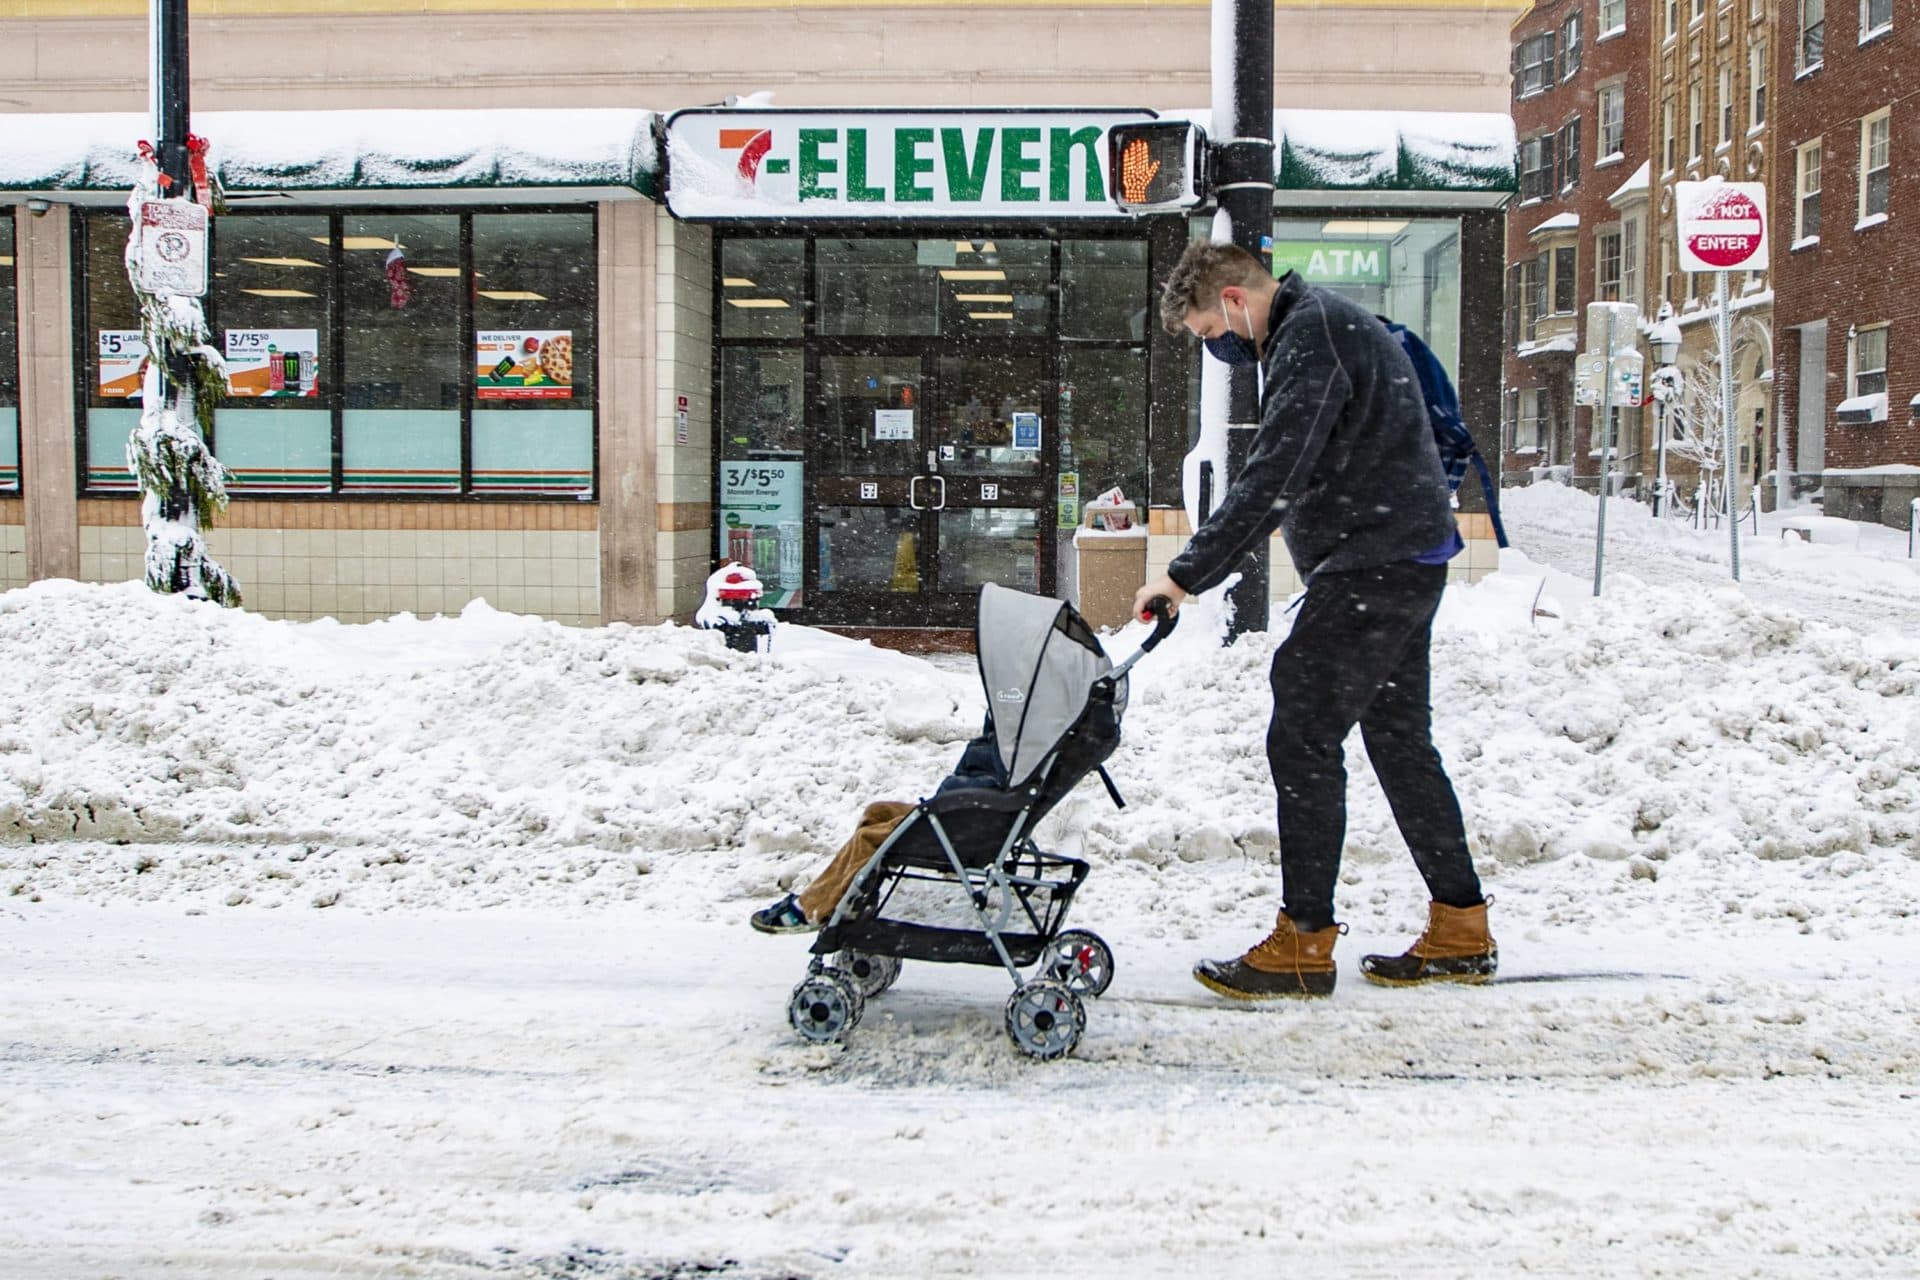 A man pushes a baby in a stroller down Cambridge Street. (Jesse Costa/WBUR)